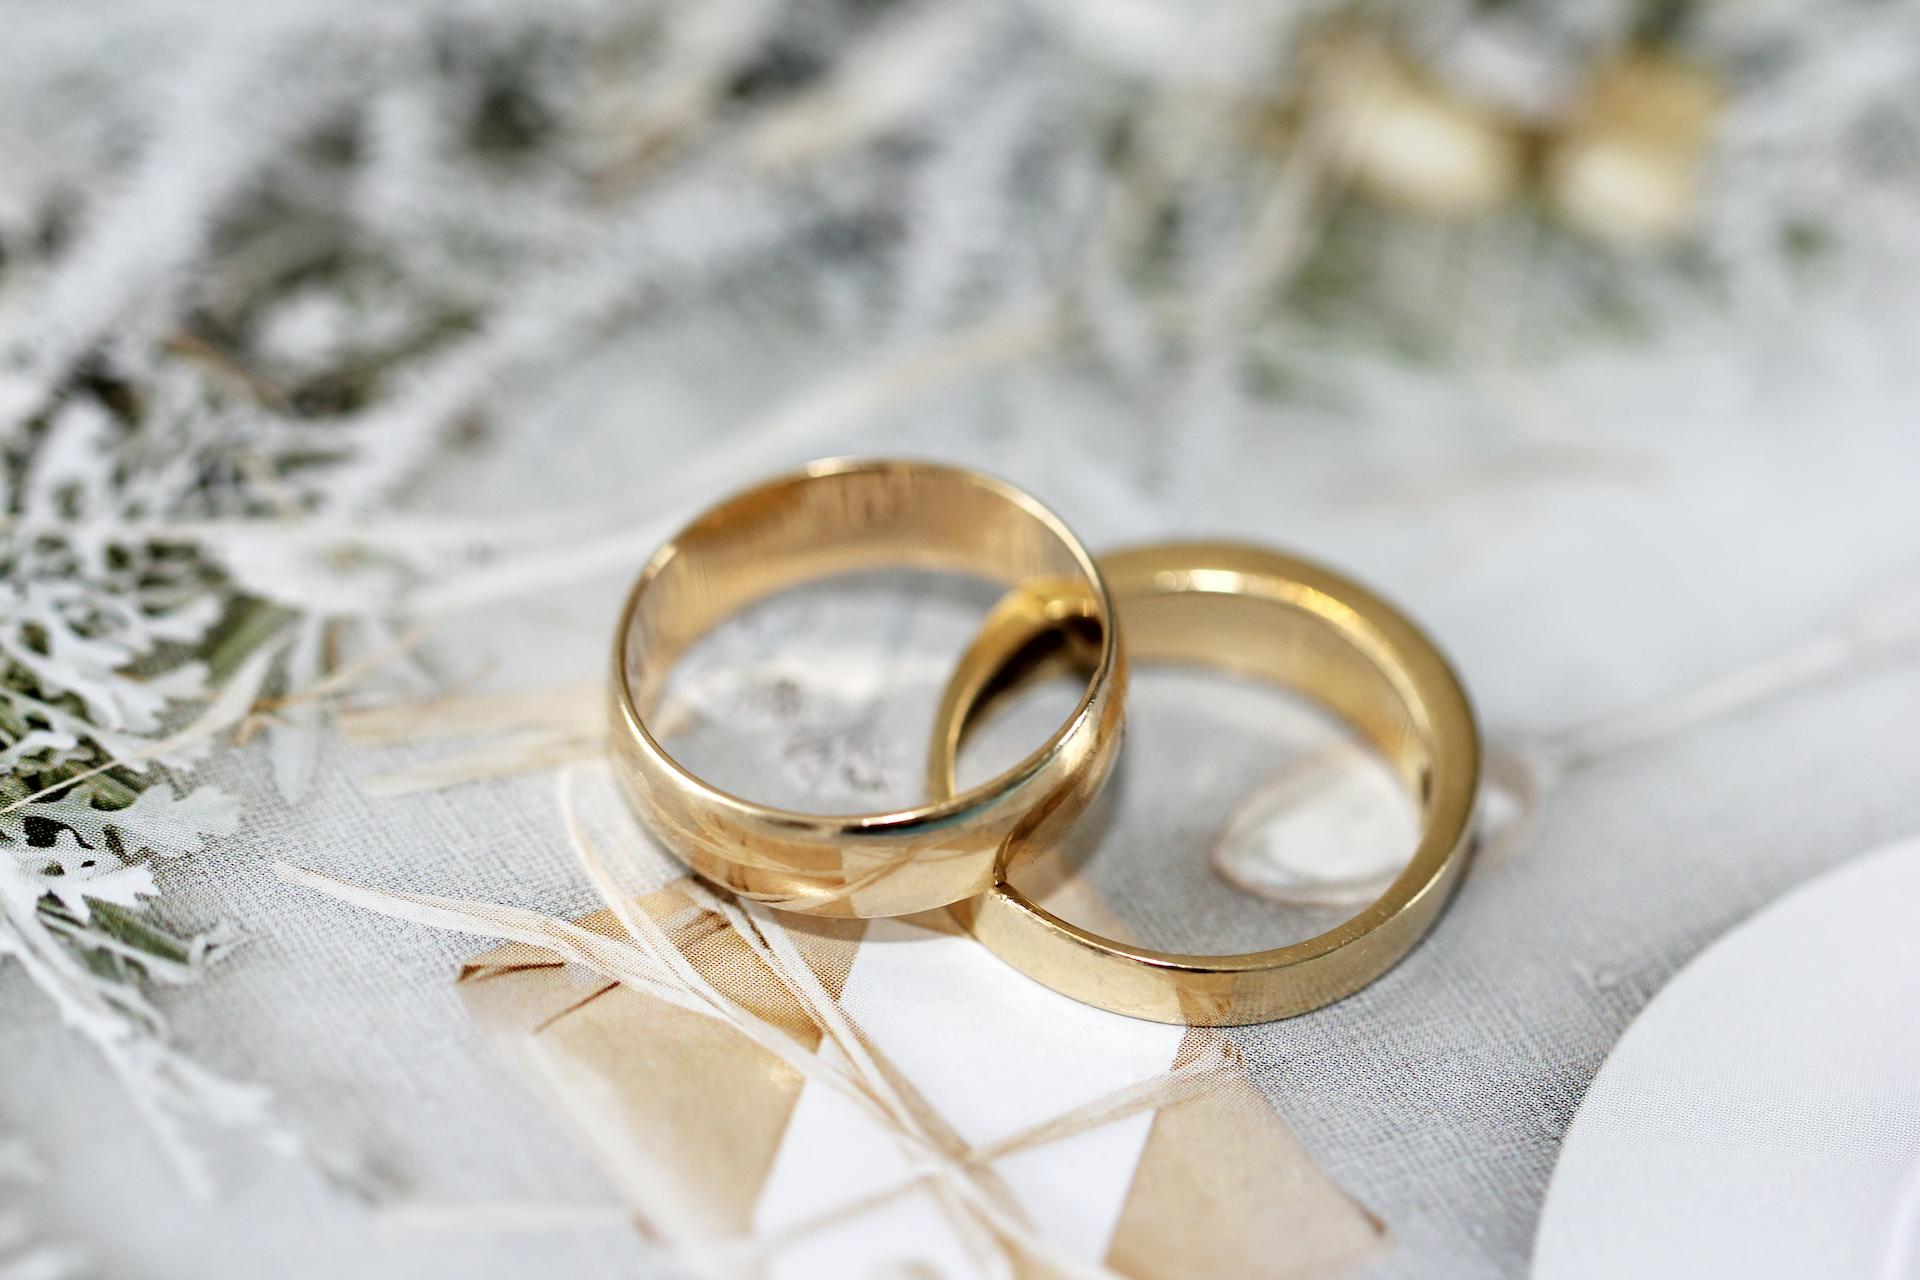 Wedding And Engagement Rings Don’t Have To Be Expensive